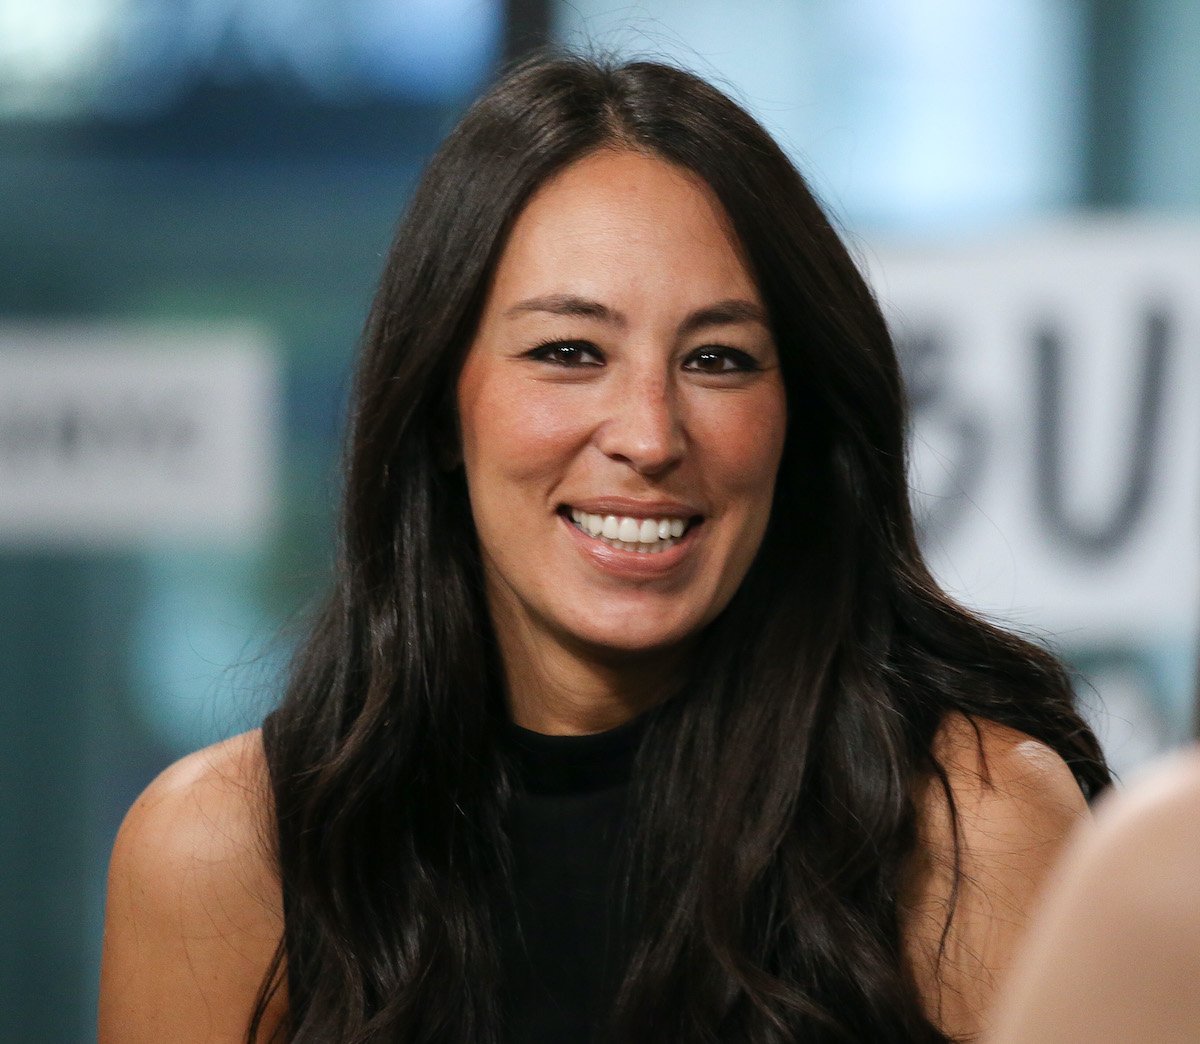 Joanna Gaines attends the BUILD event in New York City